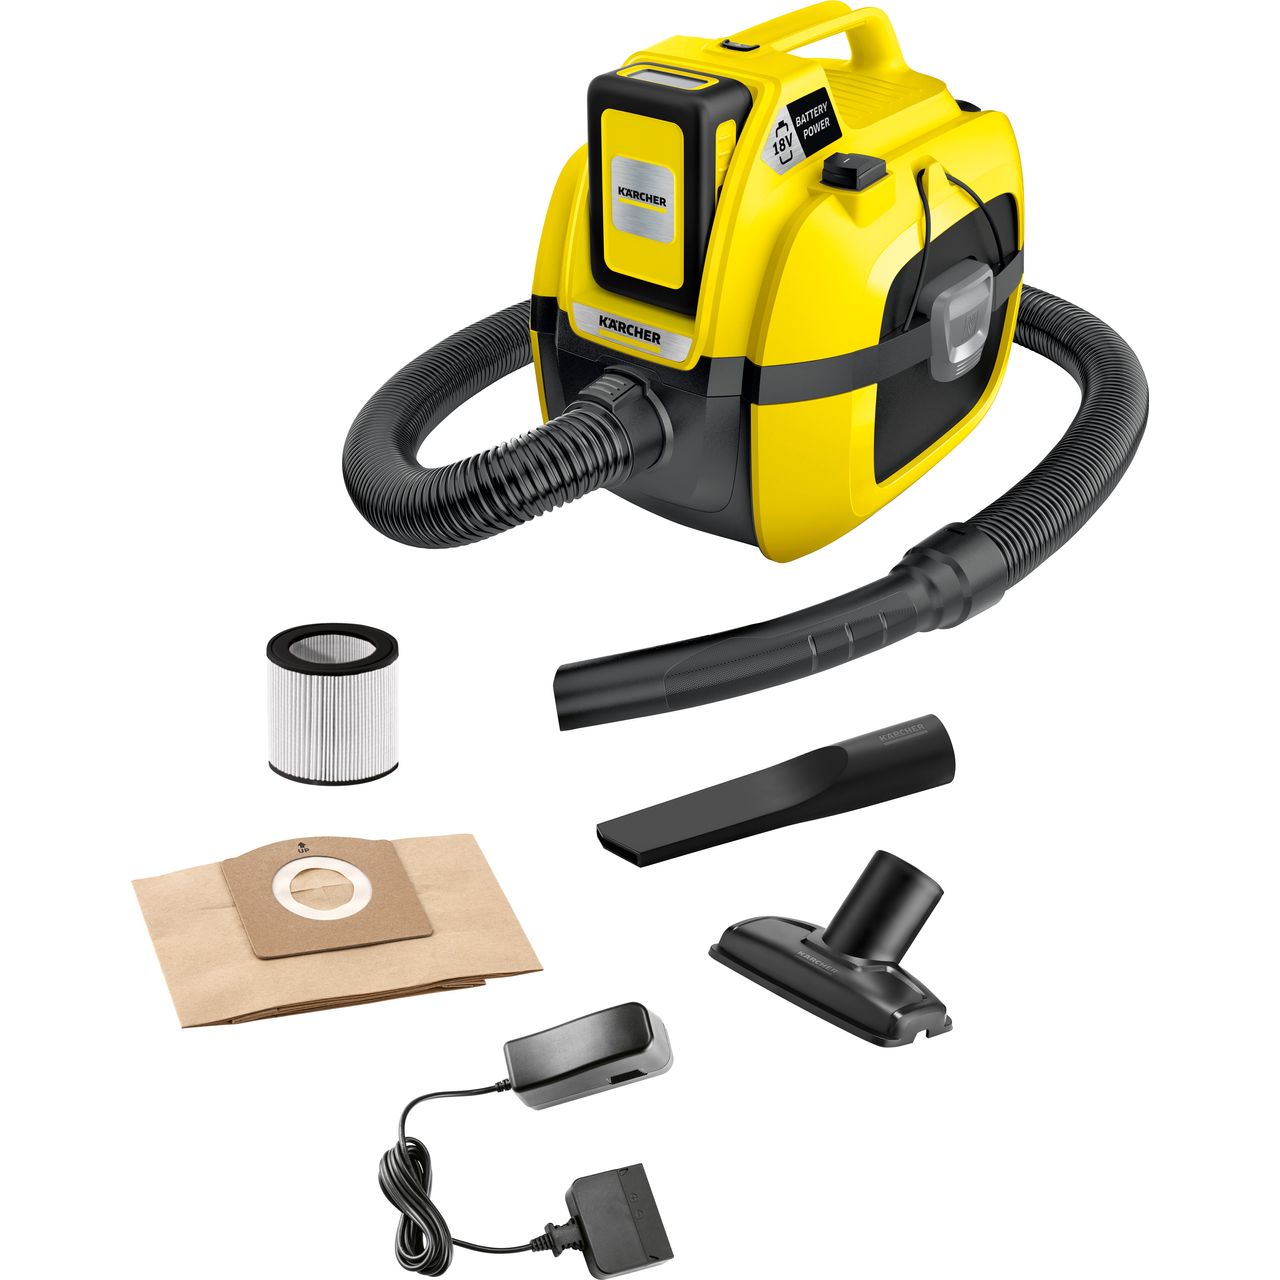 Karcher WD 1 Cordless Wet & Dry Cleaner Review